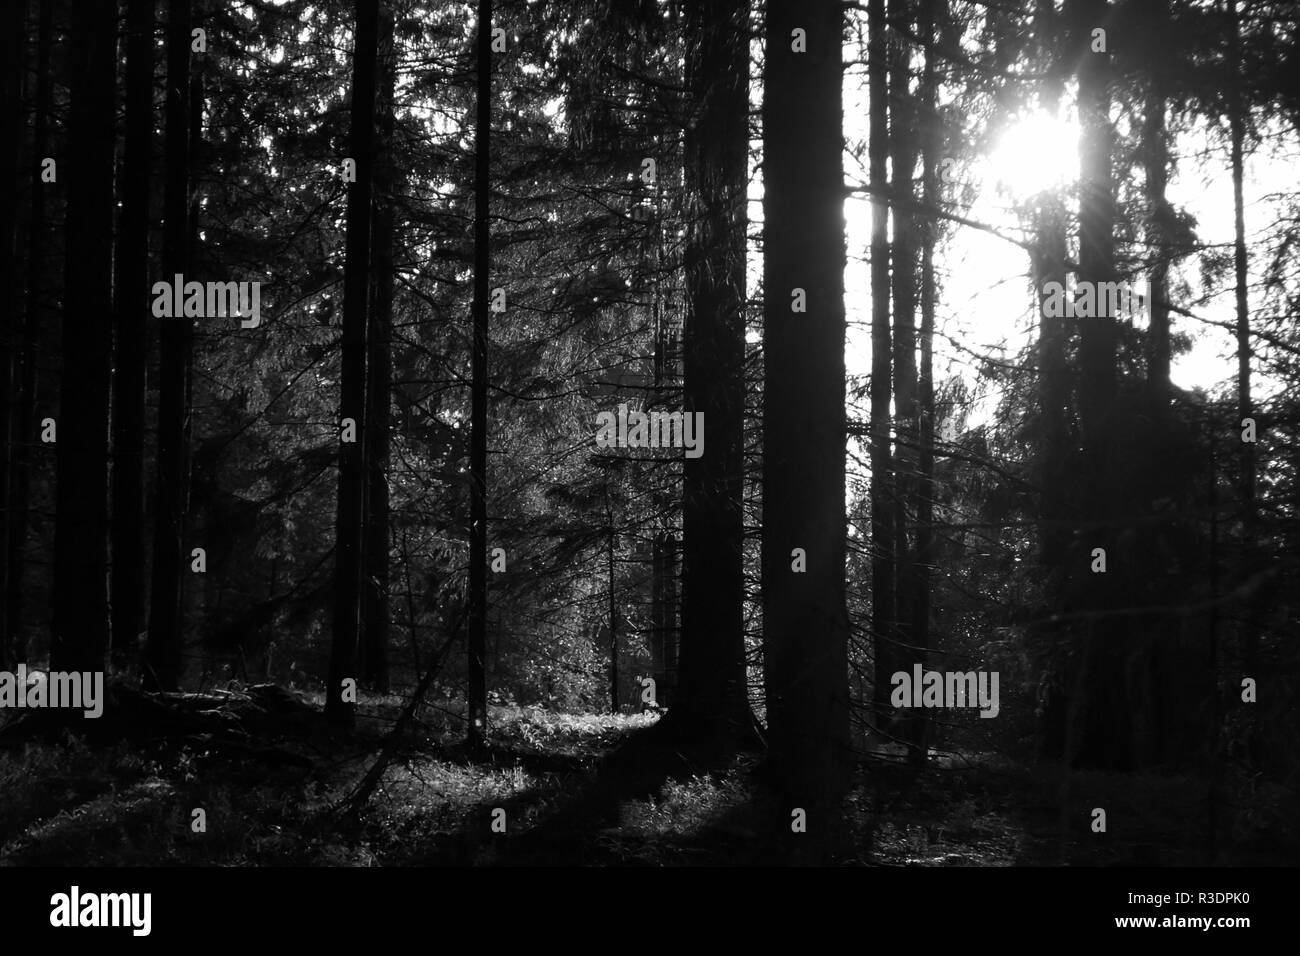 A black and white forest with sunlight shining through the trees in Dalsland, Sweden Stock Photo